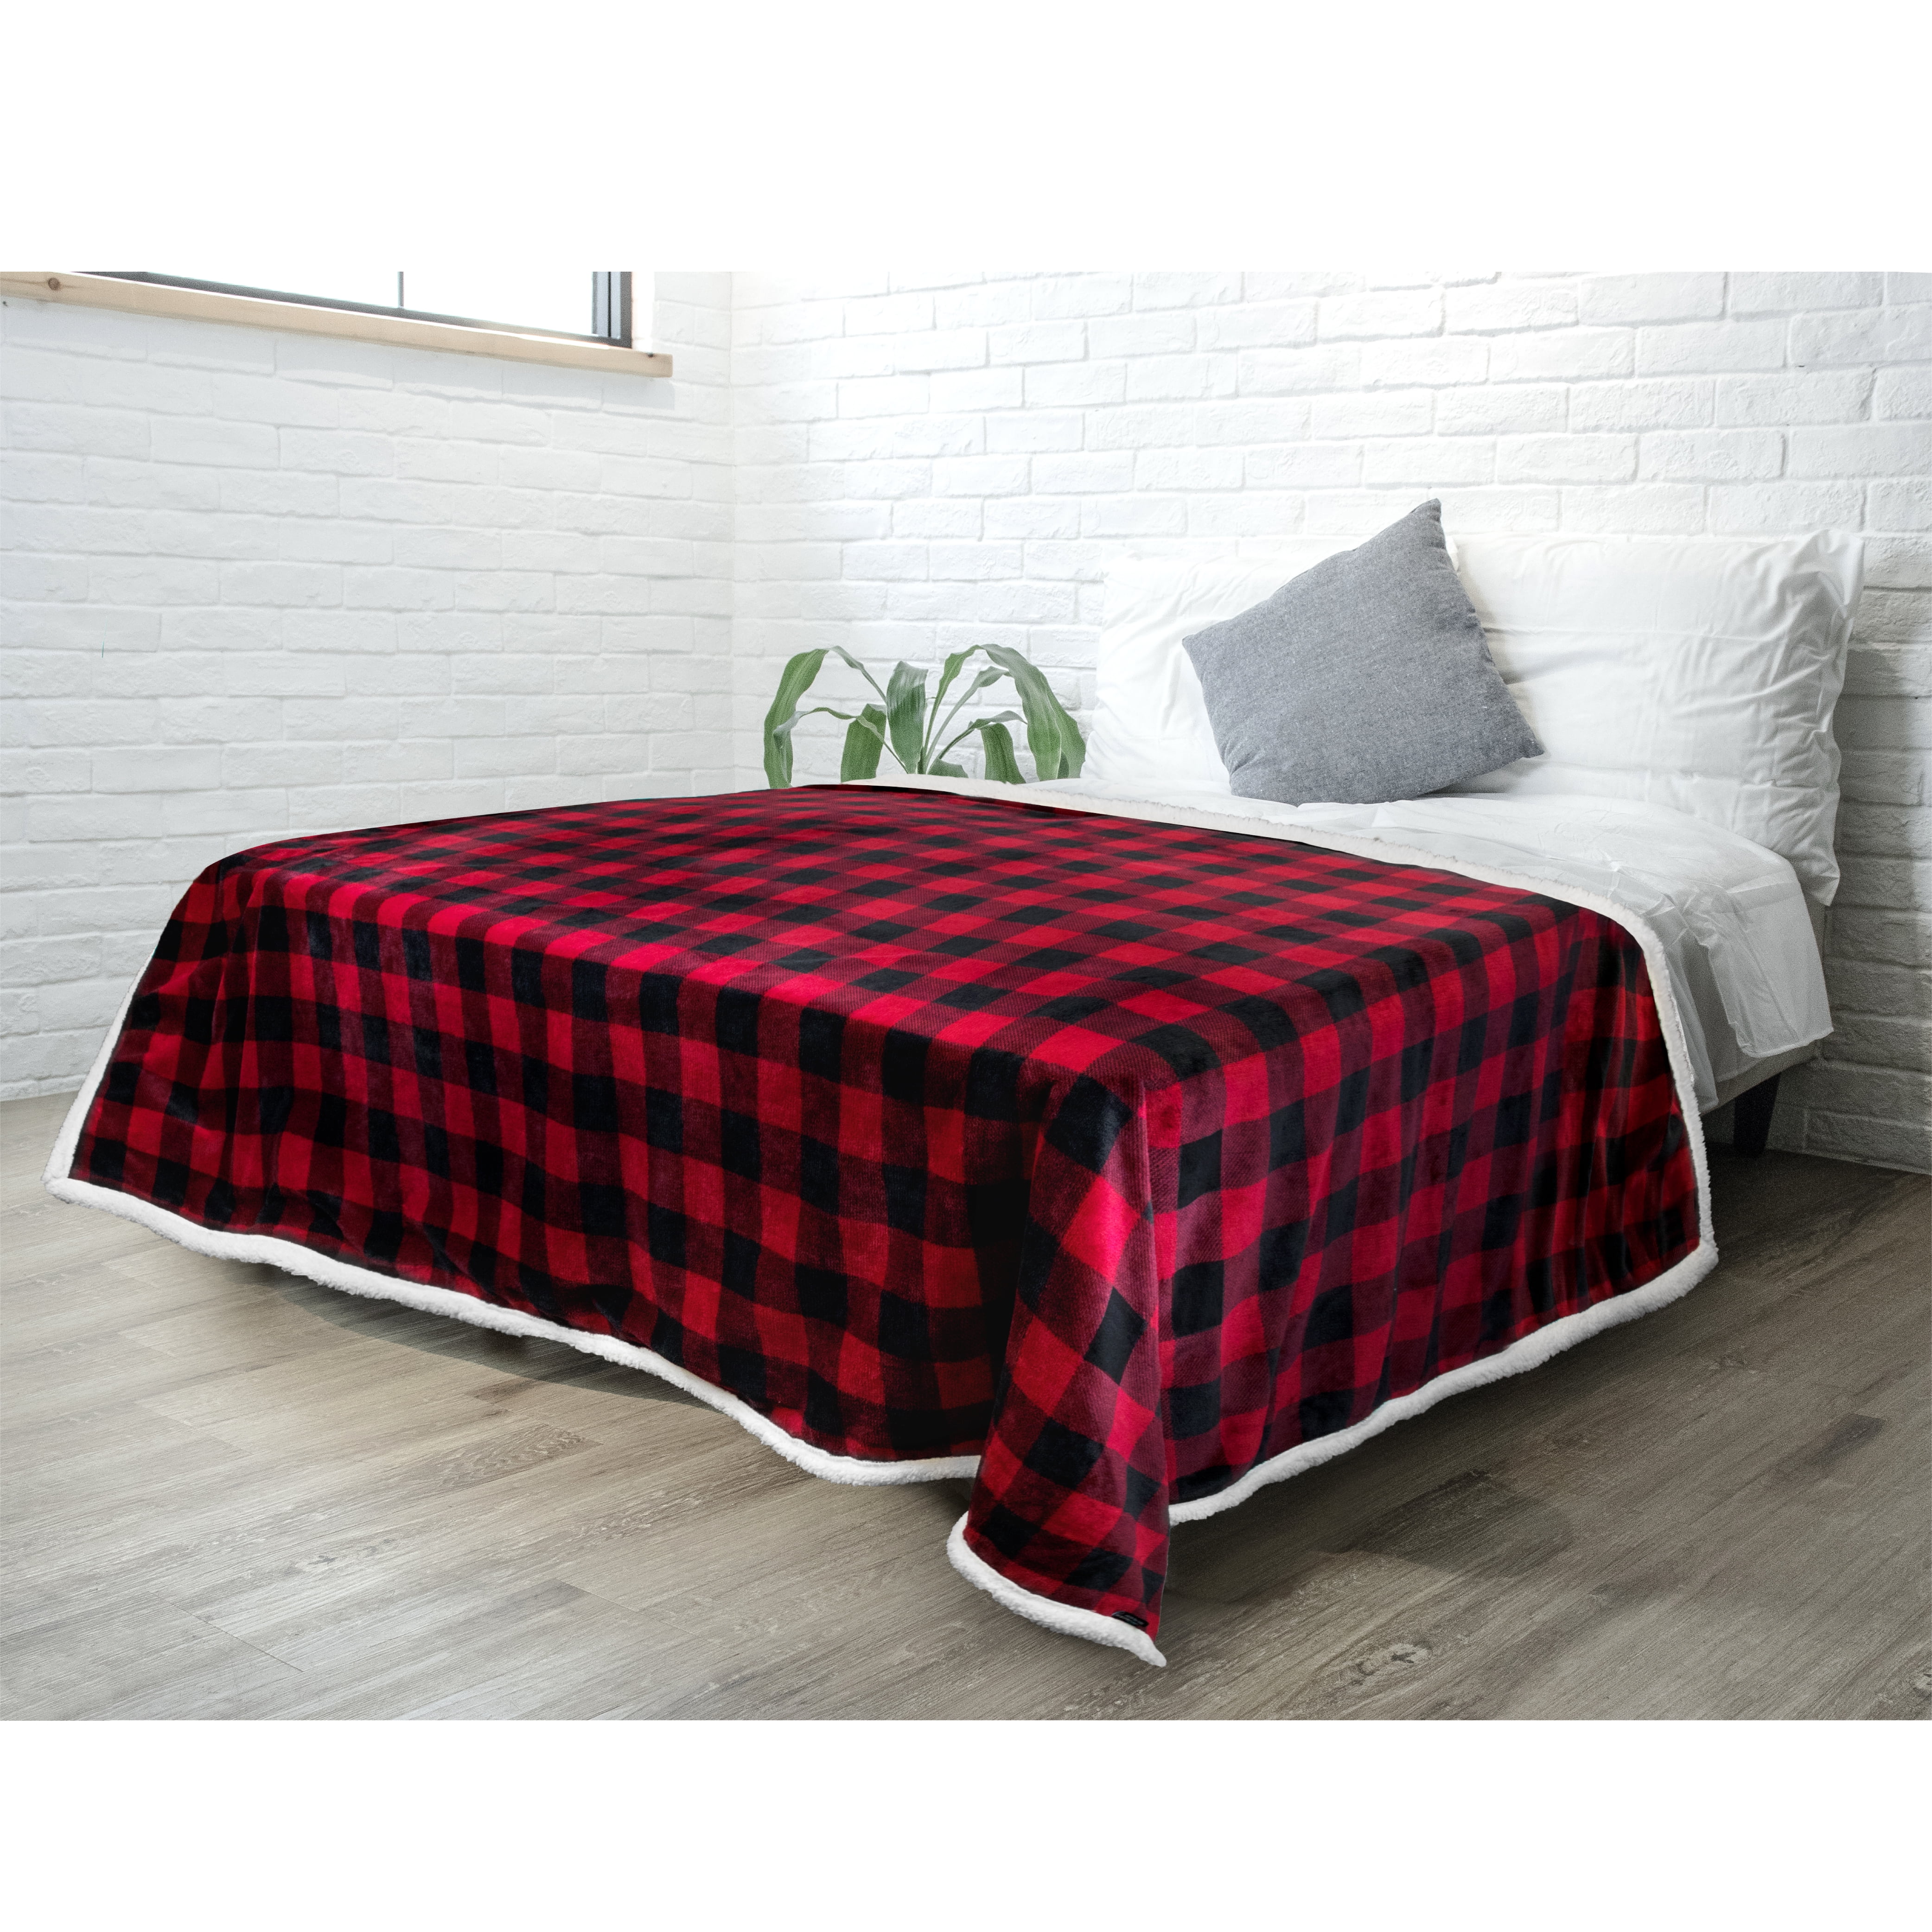 Microfiber Nap Blanket for Couch Flannel Fleece Blanket Bed Red Checkered Truck with Christmas Tree Throw Blanket 80 x 50 Sofa Cozy Fuzzy Warm Cute Lightweight Blanket for Women Girl Baby